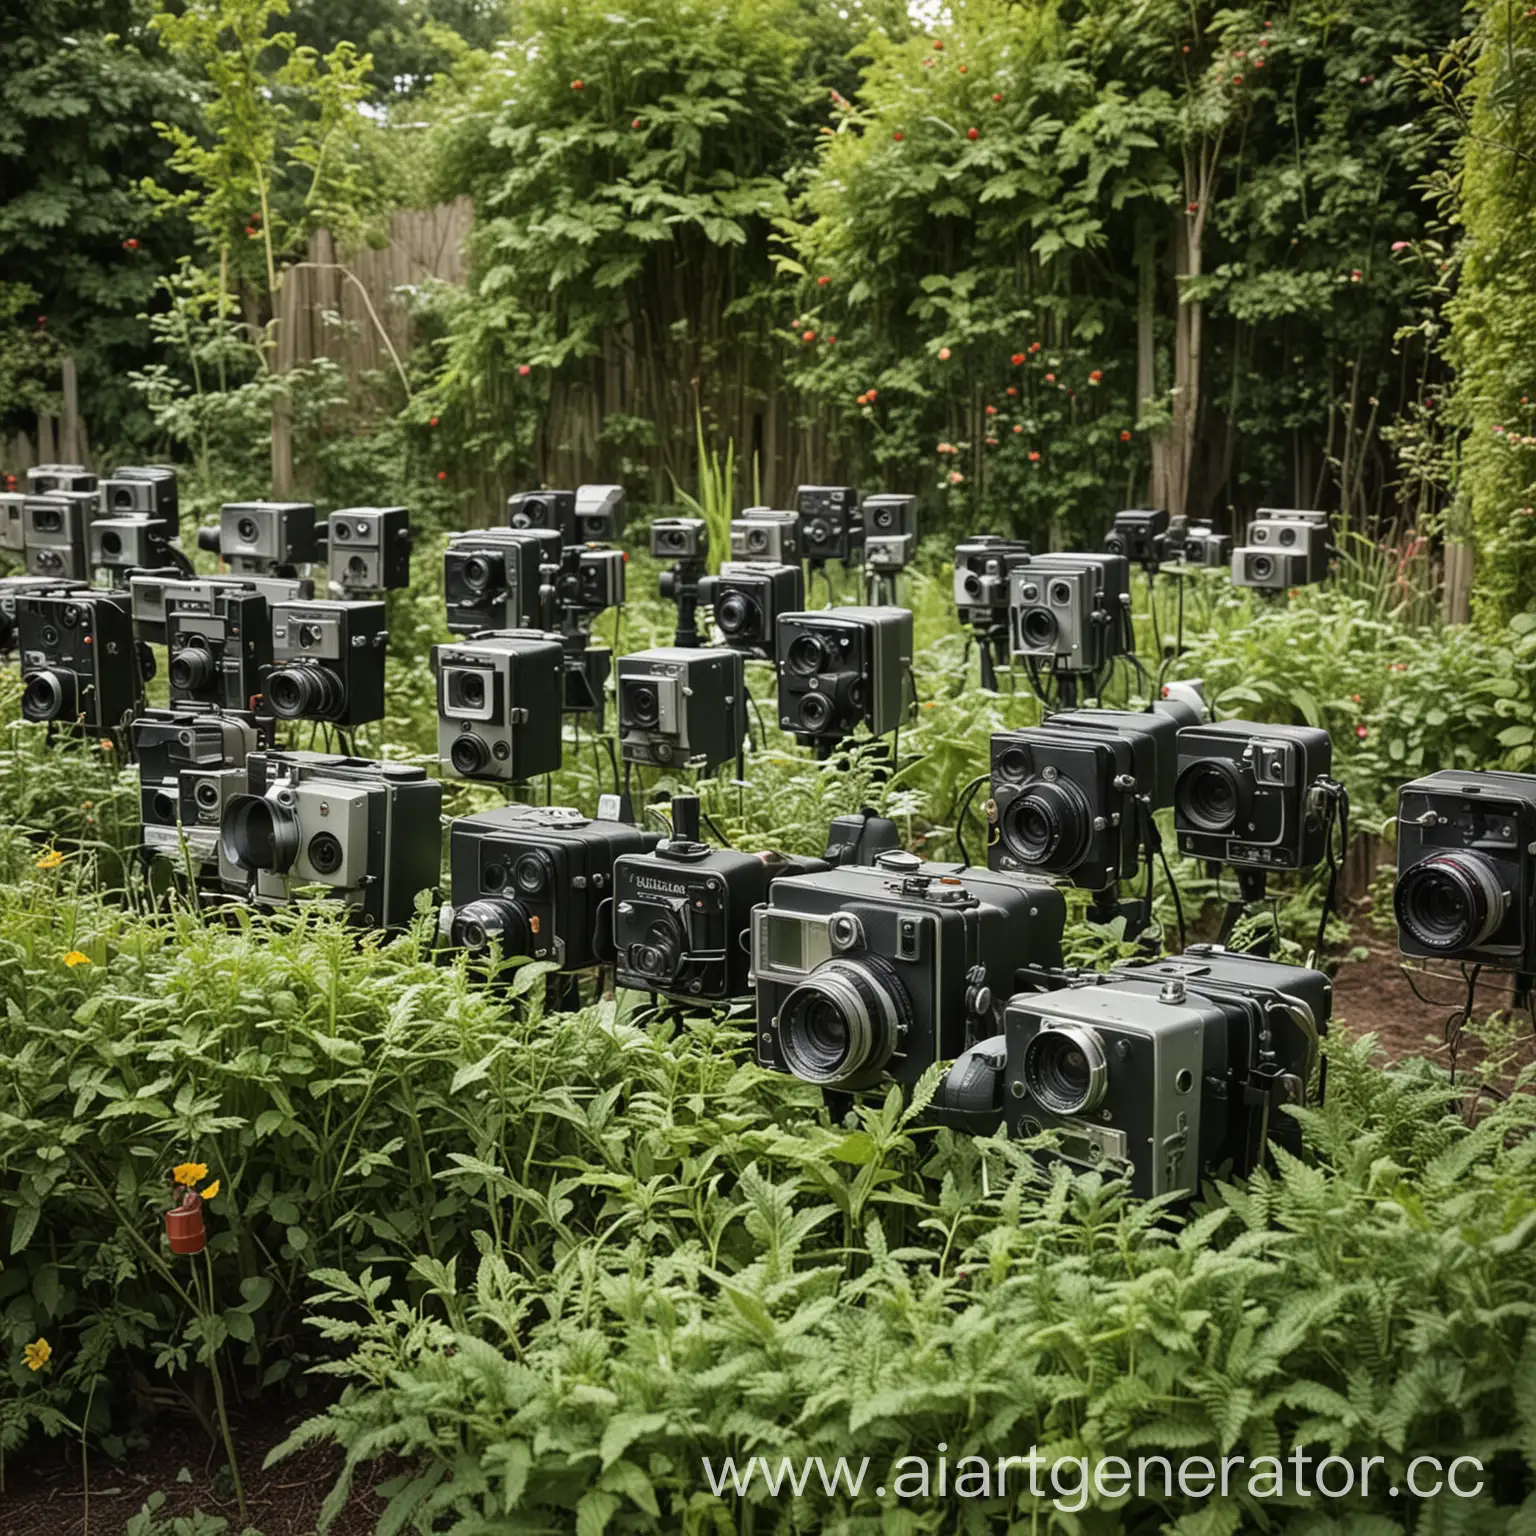 Colorful-Cameras-Blossoming-in-a-Vibrant-Garden